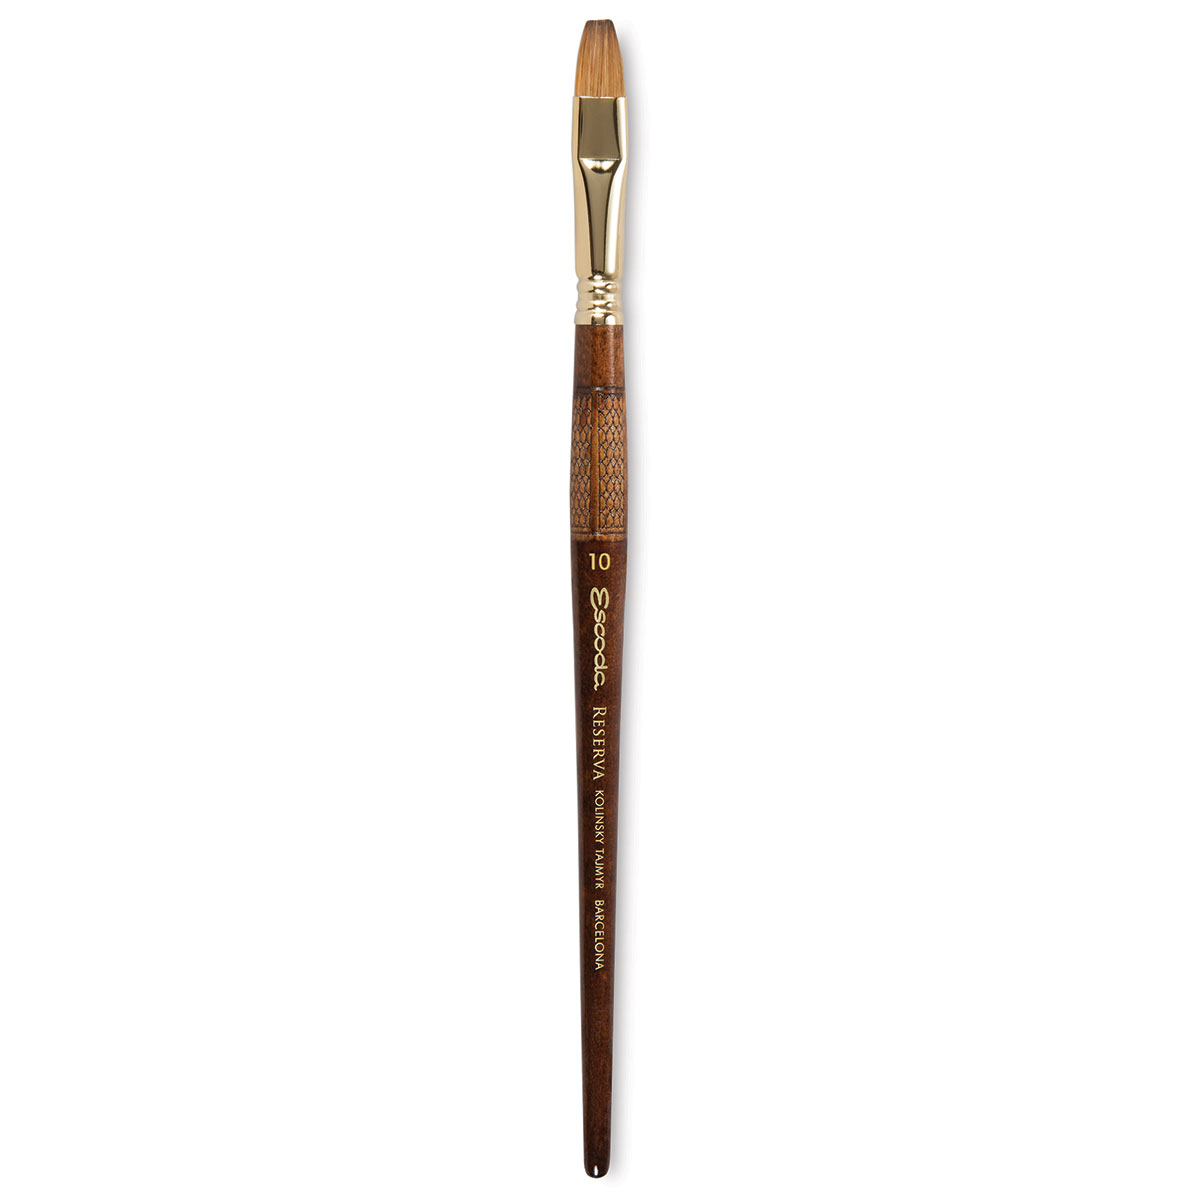 Escoda Paint Brushes in Canada – Kroma Artist's Acrylics